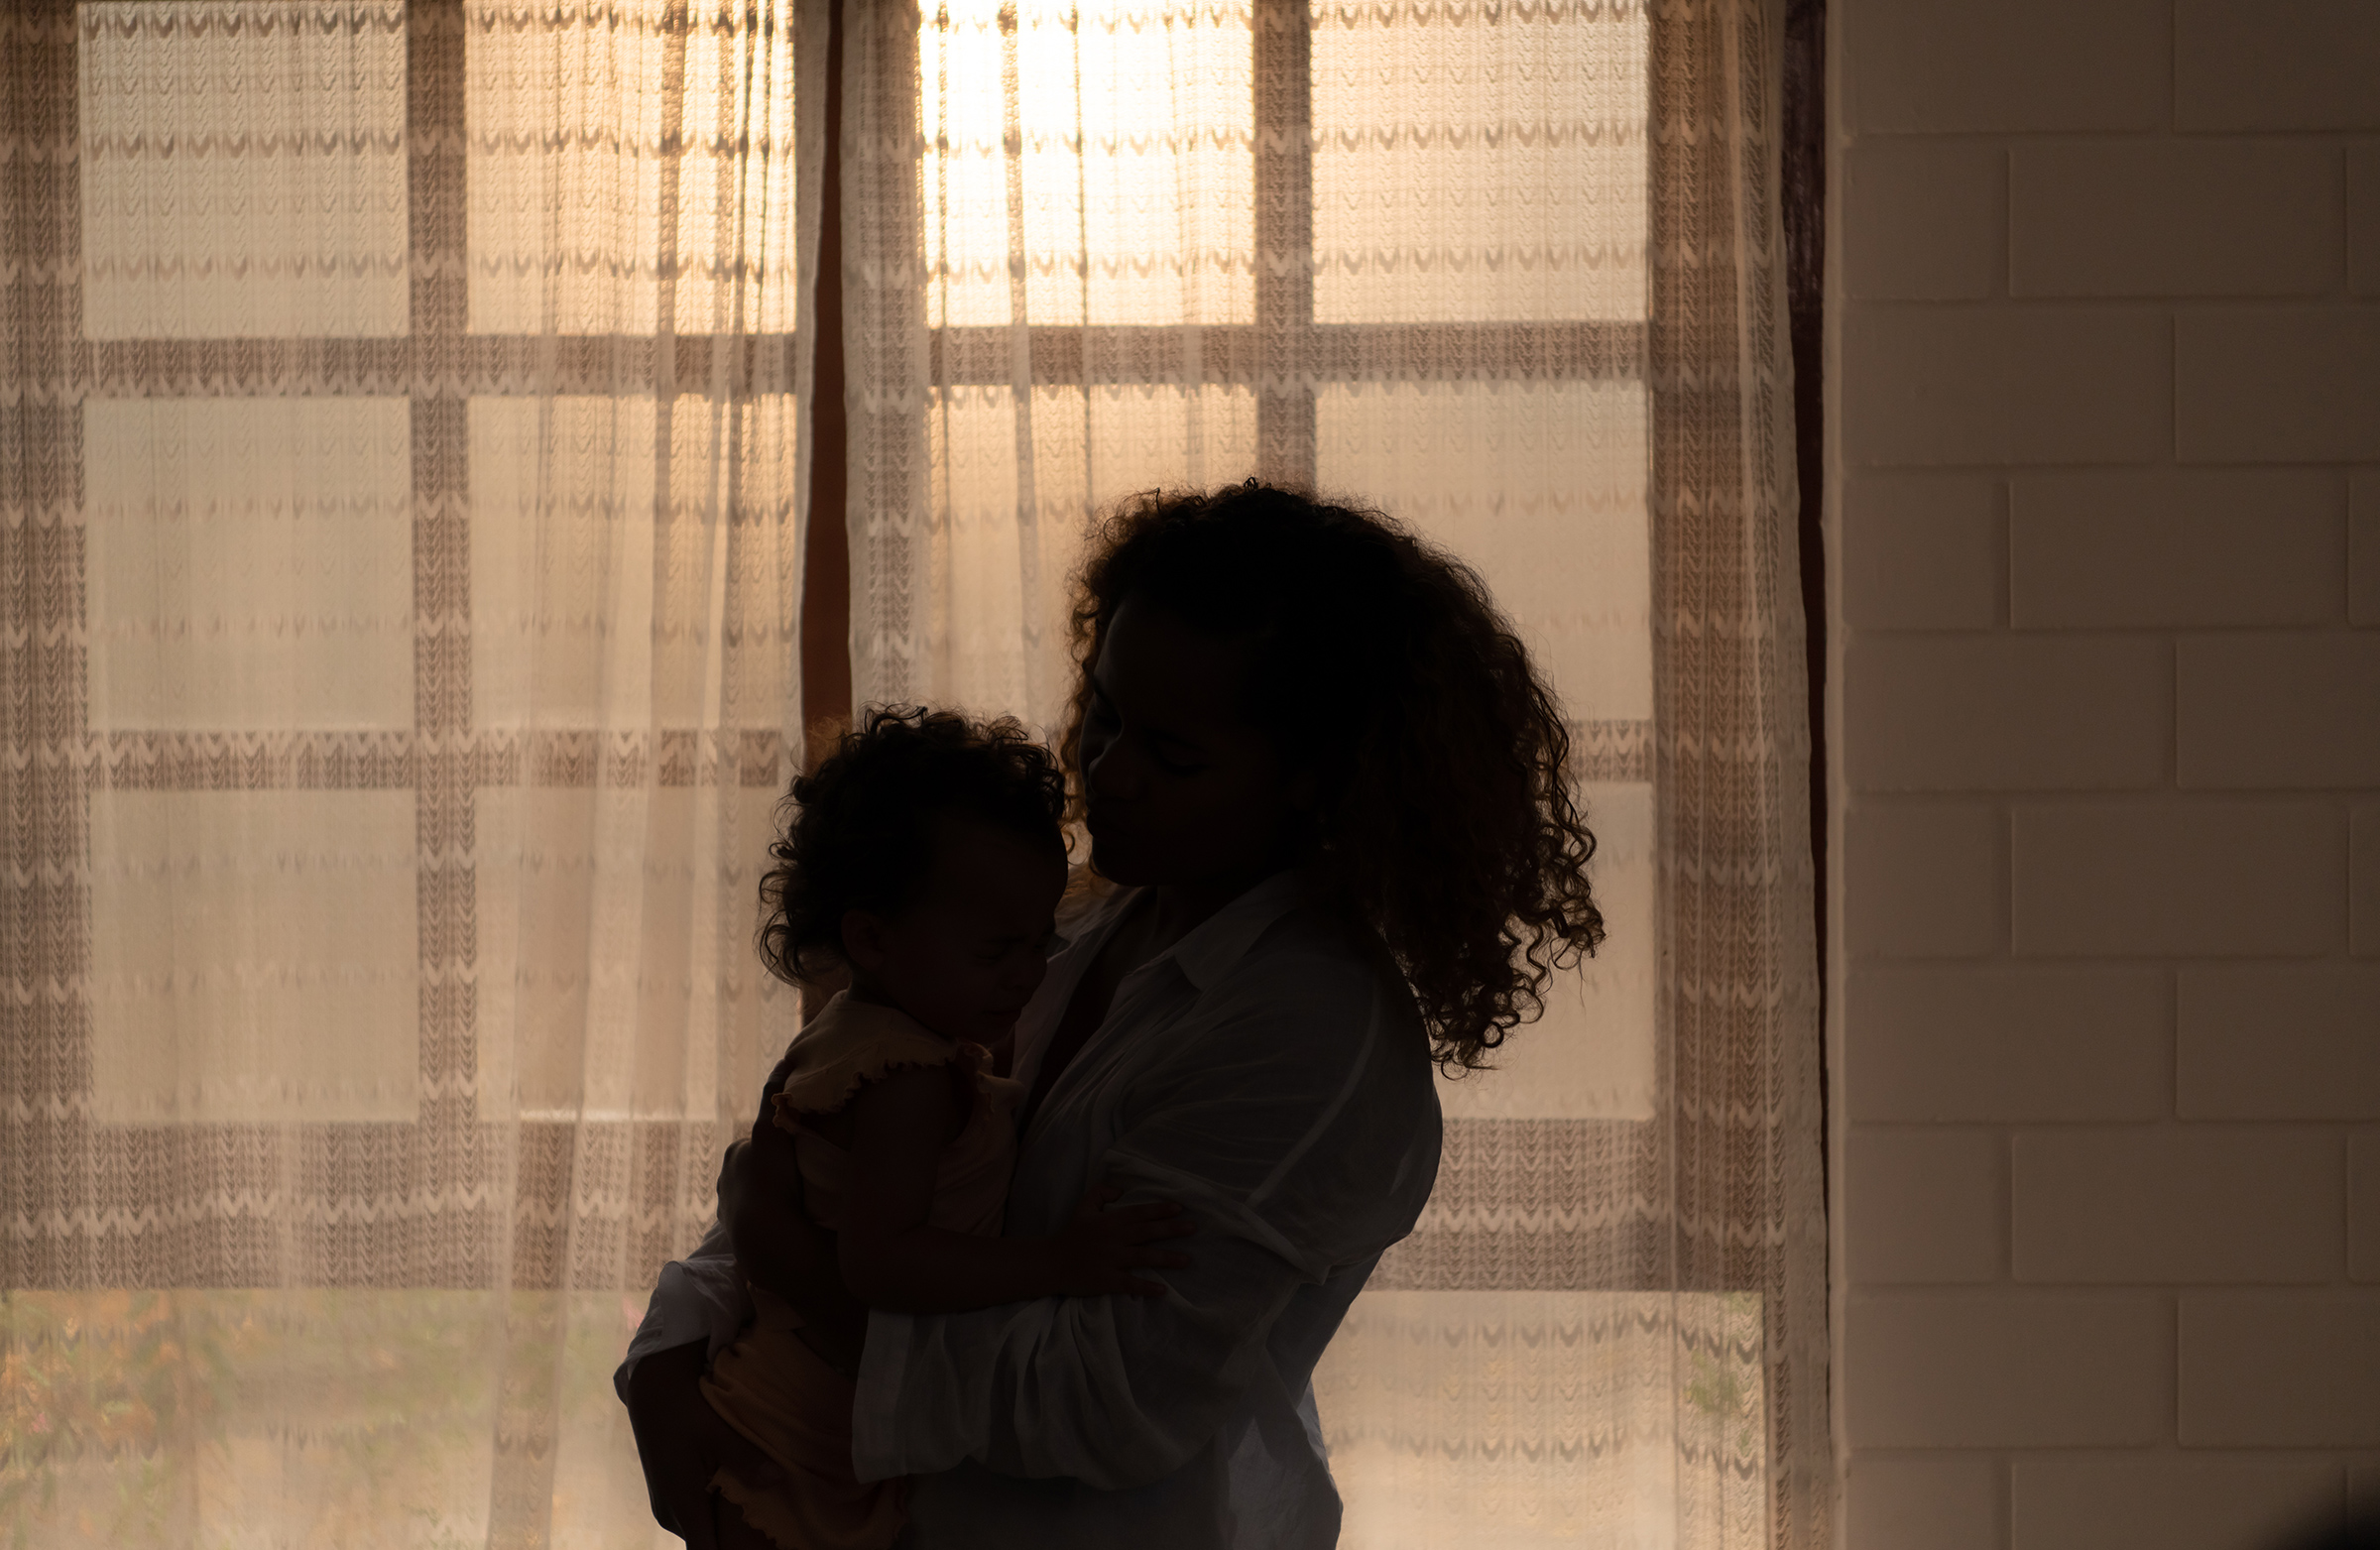 Elaine Welteroth and Serena Williams are working to improve outcomes for Black mothers through BirthFUND. 'Having babies in America was a wake-up call.' (Getty Images)